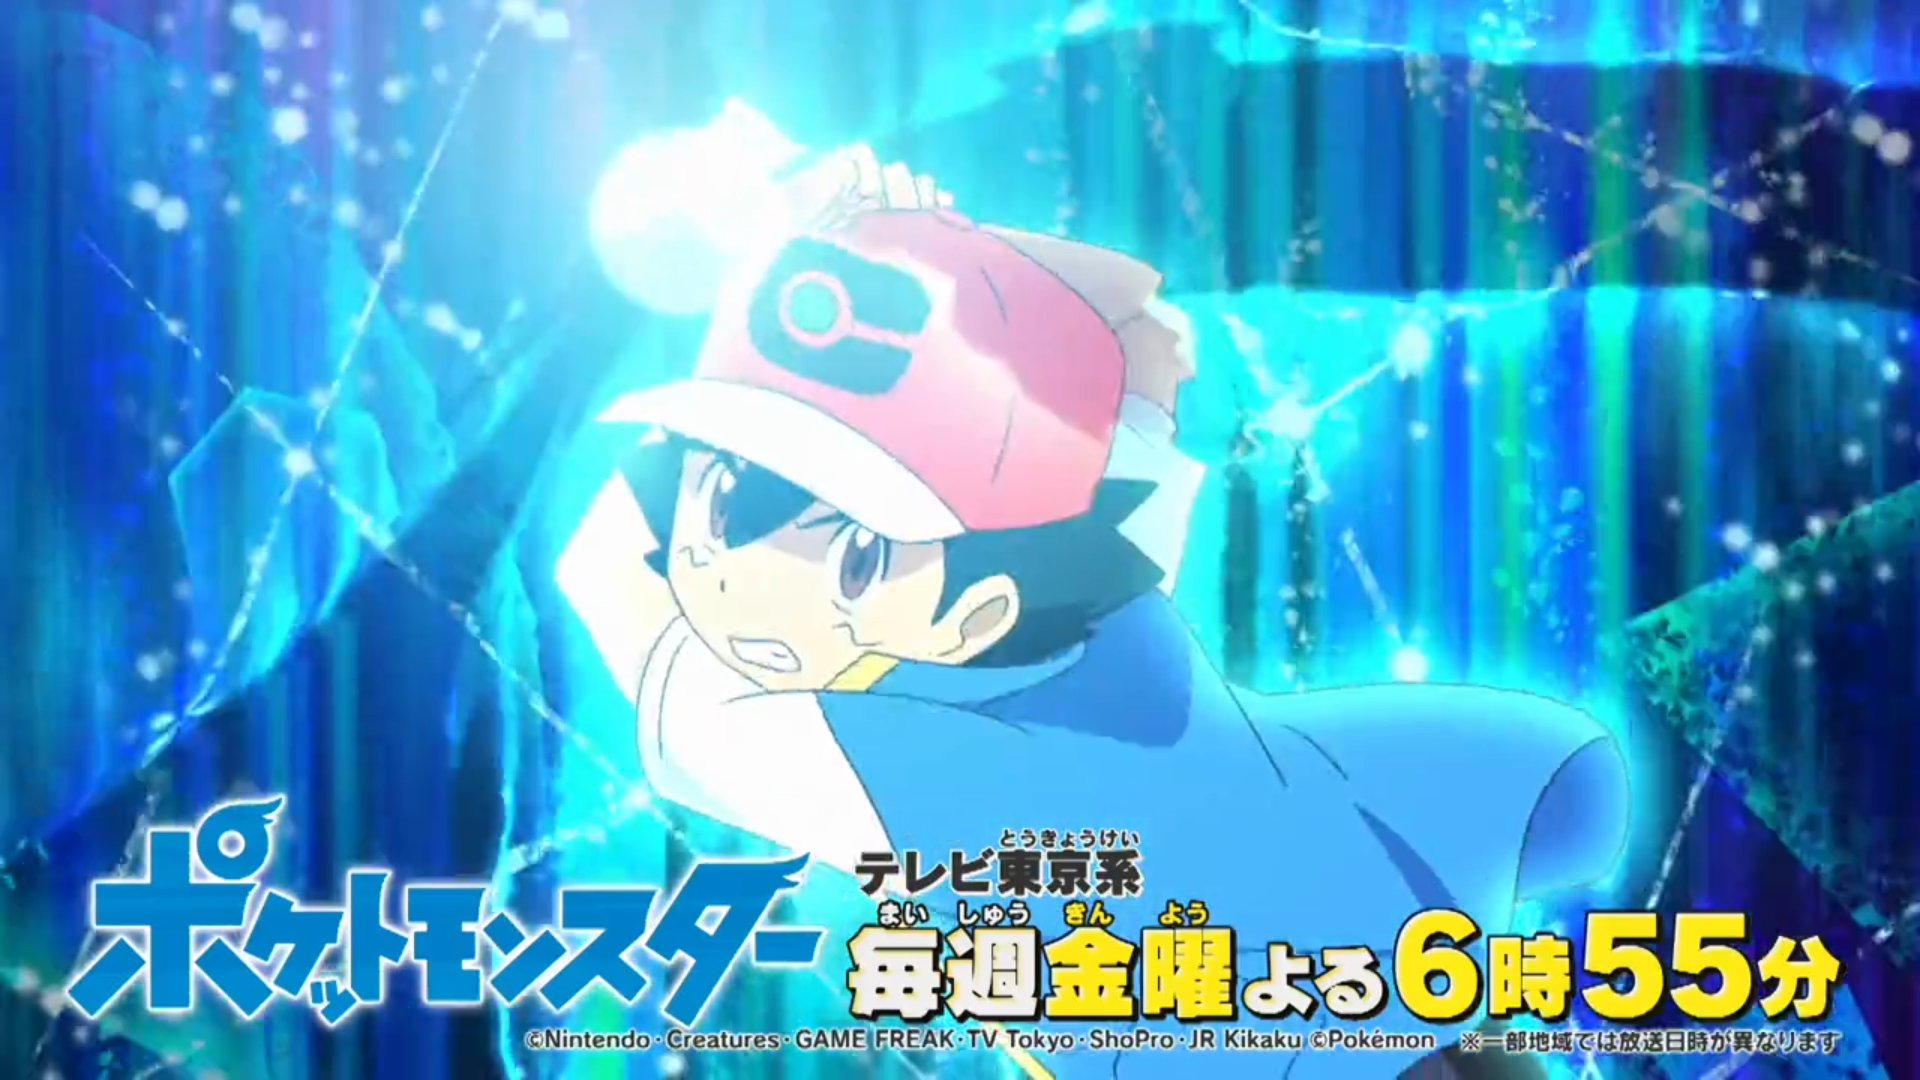 What do you think of Ash's Aura powers? Is it good or bad that he has it?